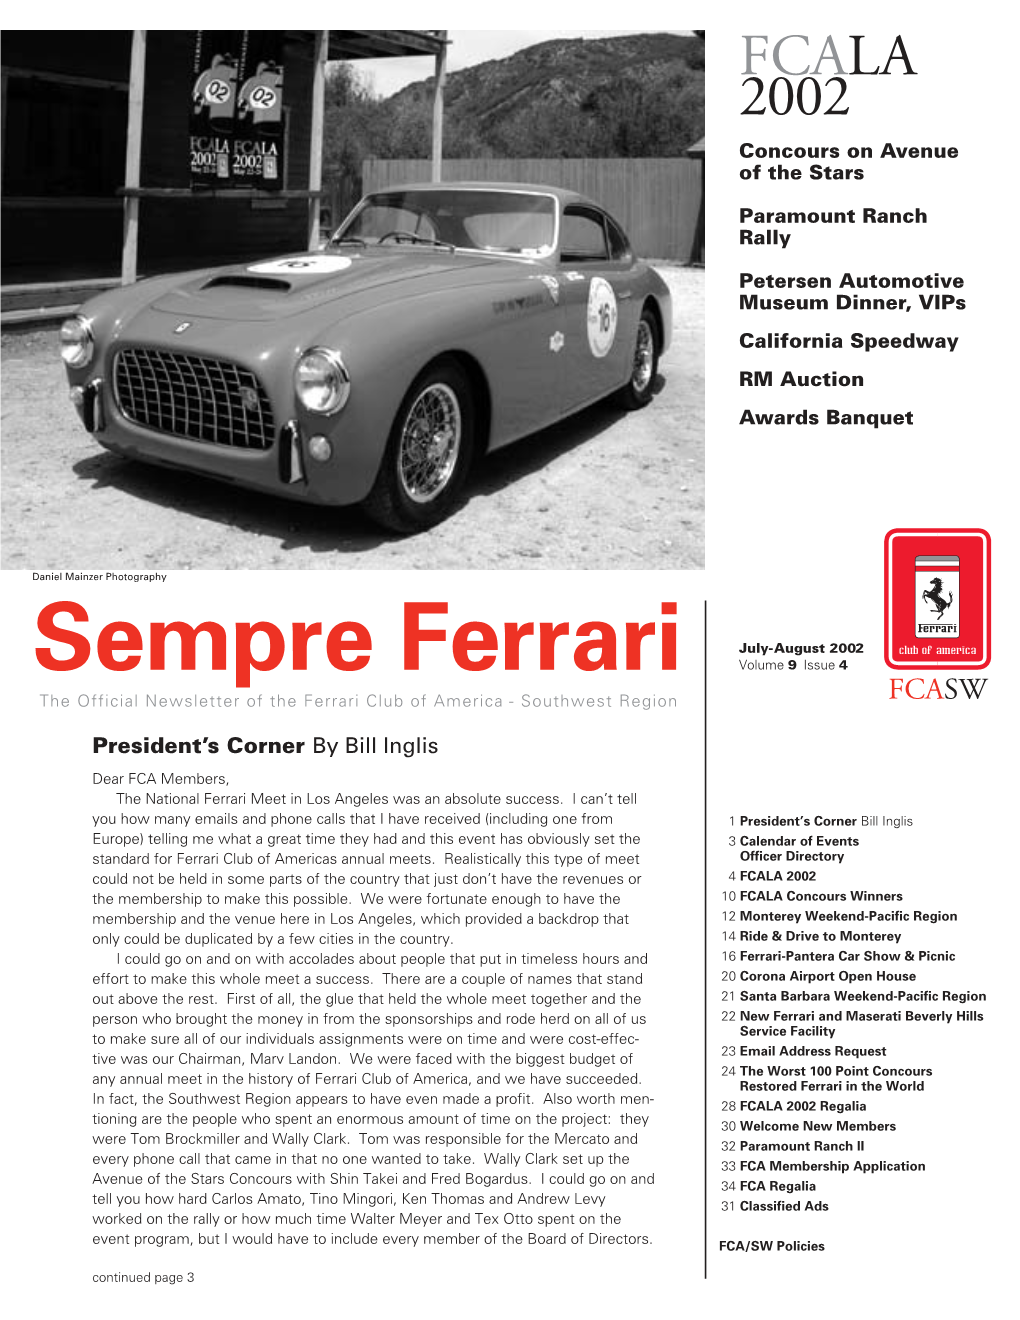 Volume 9 Issue 4 the Official Newsletter of the Ferrari Club of America - Southwest Region FCASW